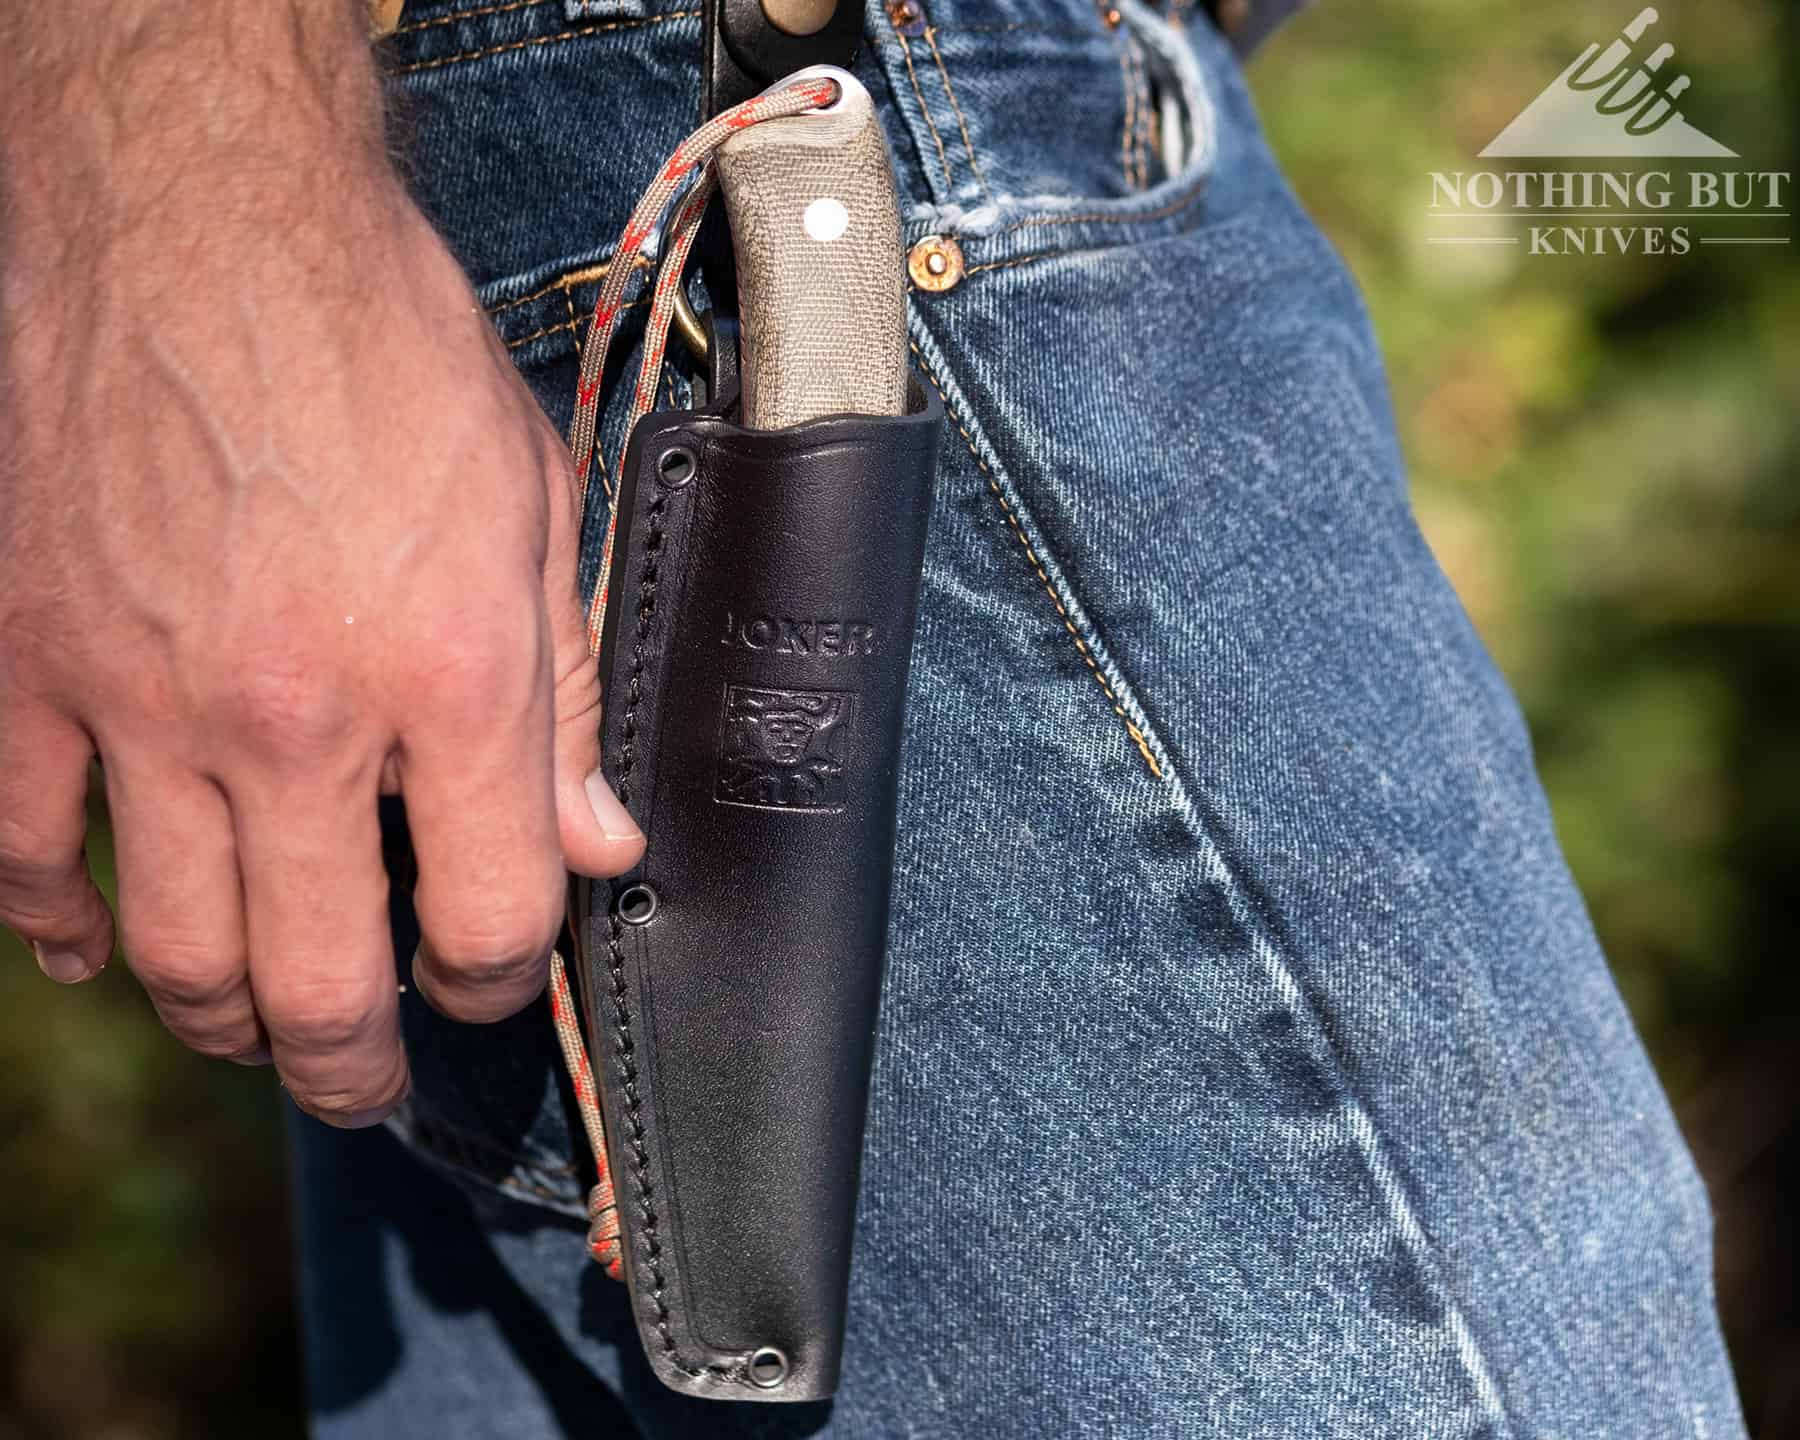 The Joker Bushcrafter ships with a high quality black leather sheath with great retention. 